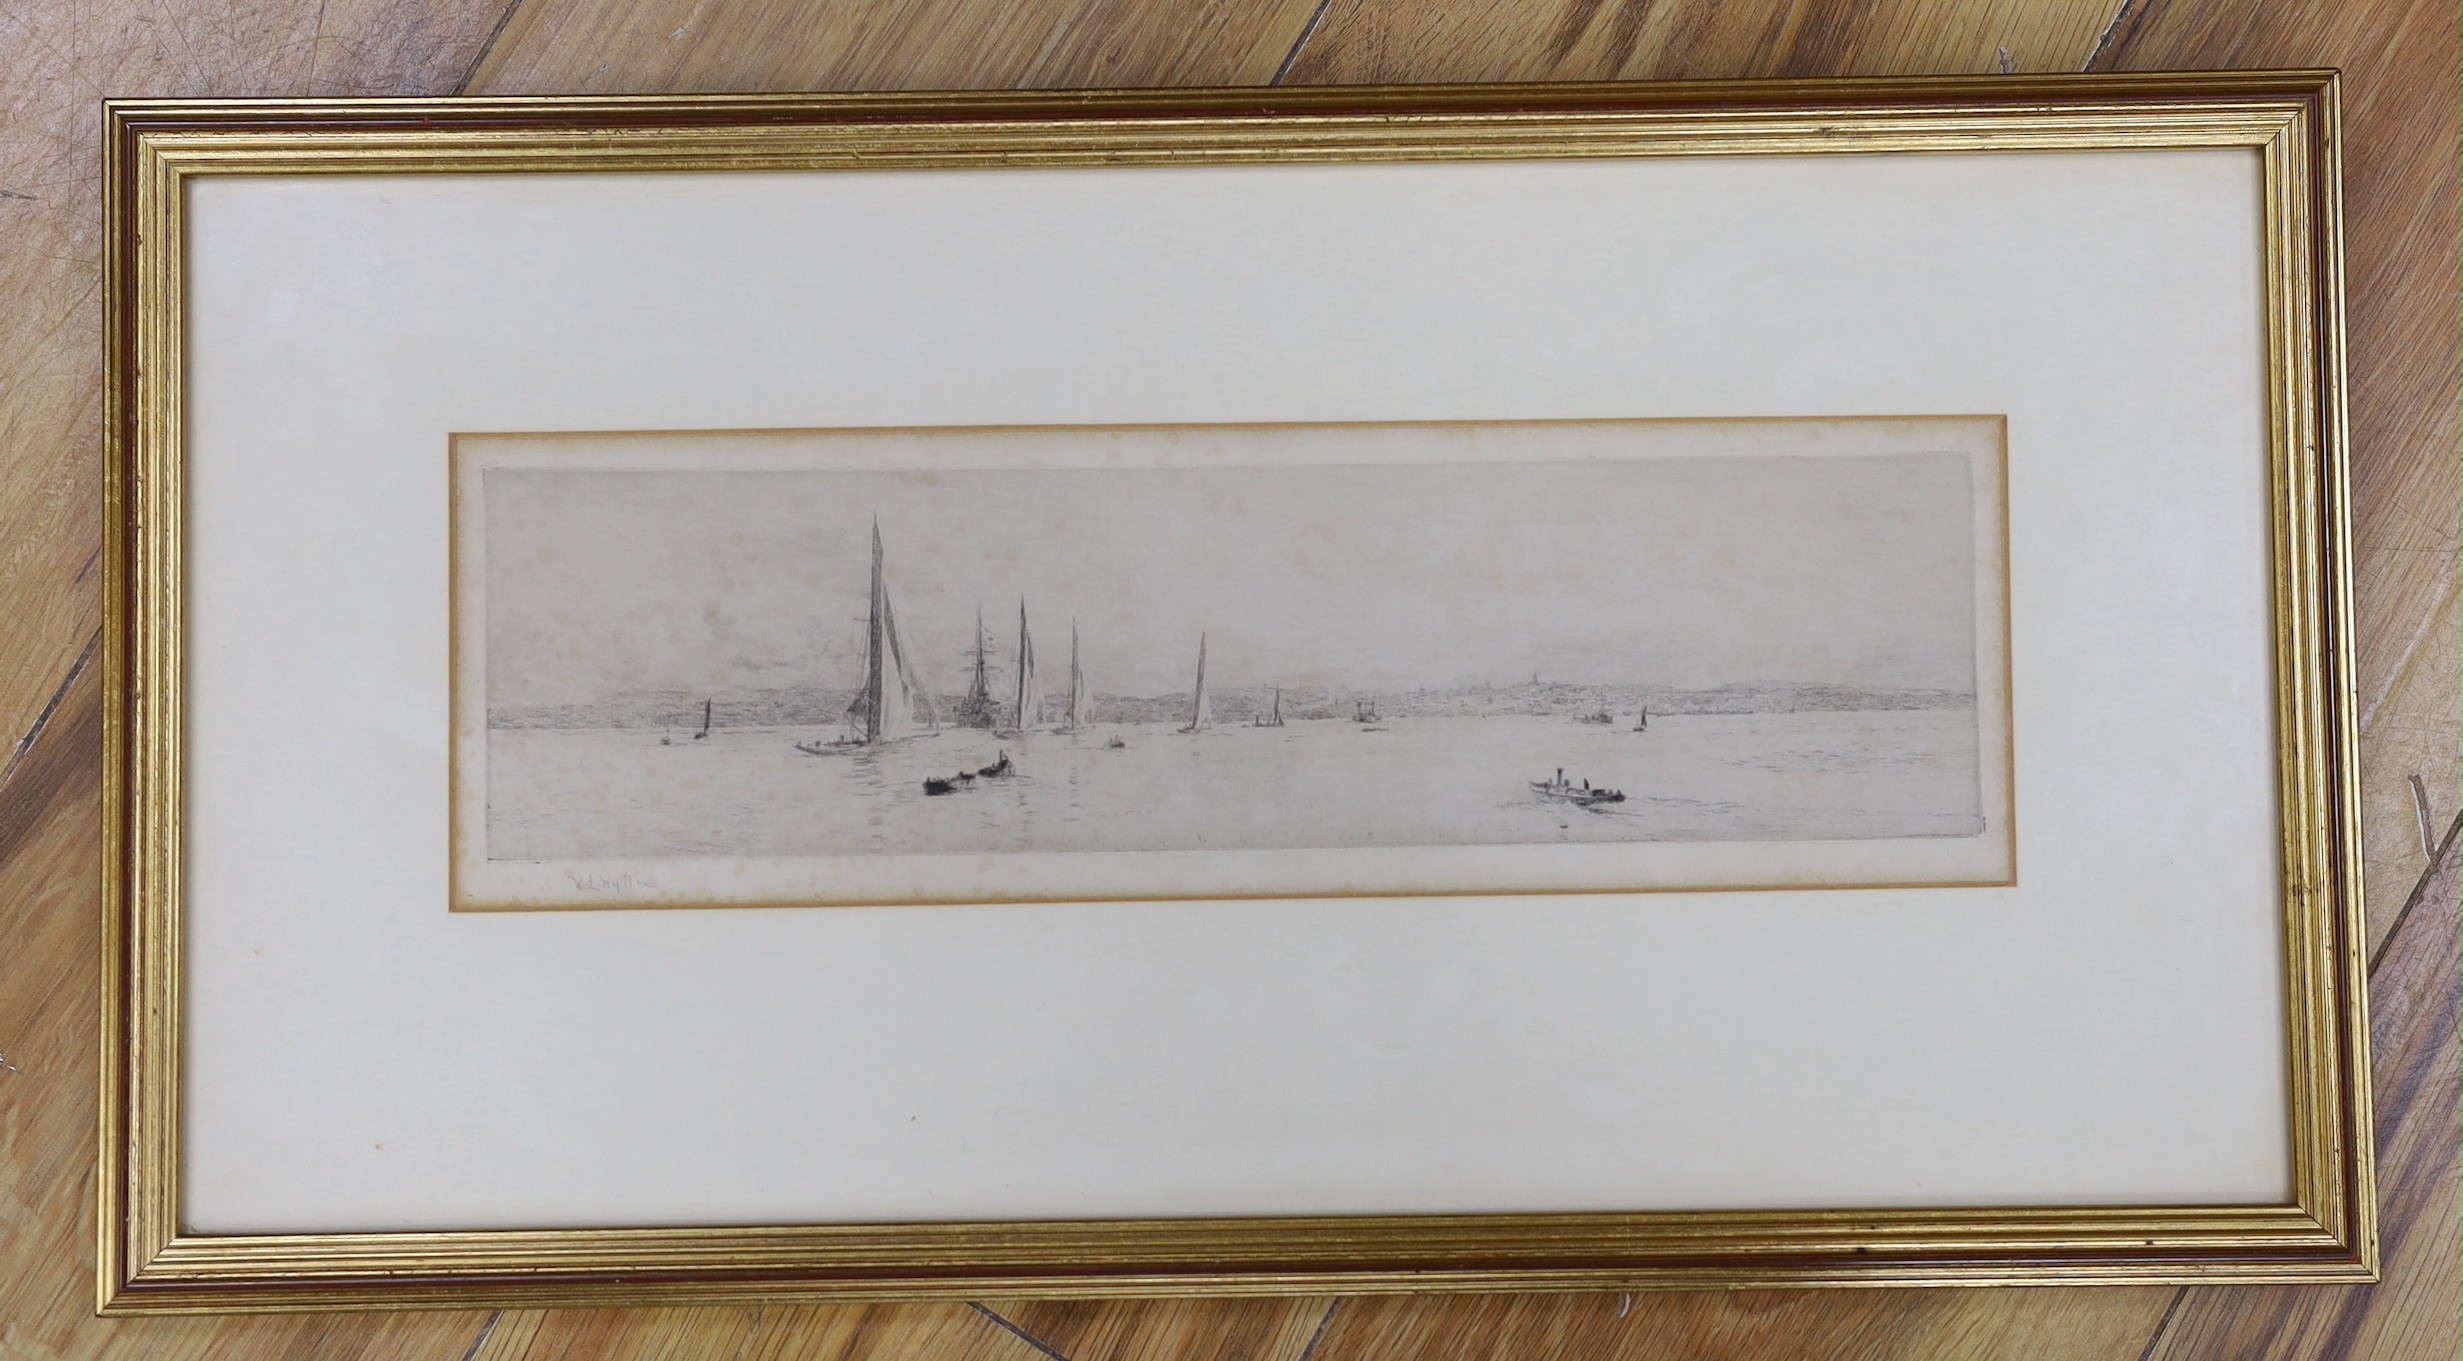 William Lionel Wyllie (1851-1931), drypoint etching, 'Yachts on the Solent', signed in pencil, 9 x 33cm